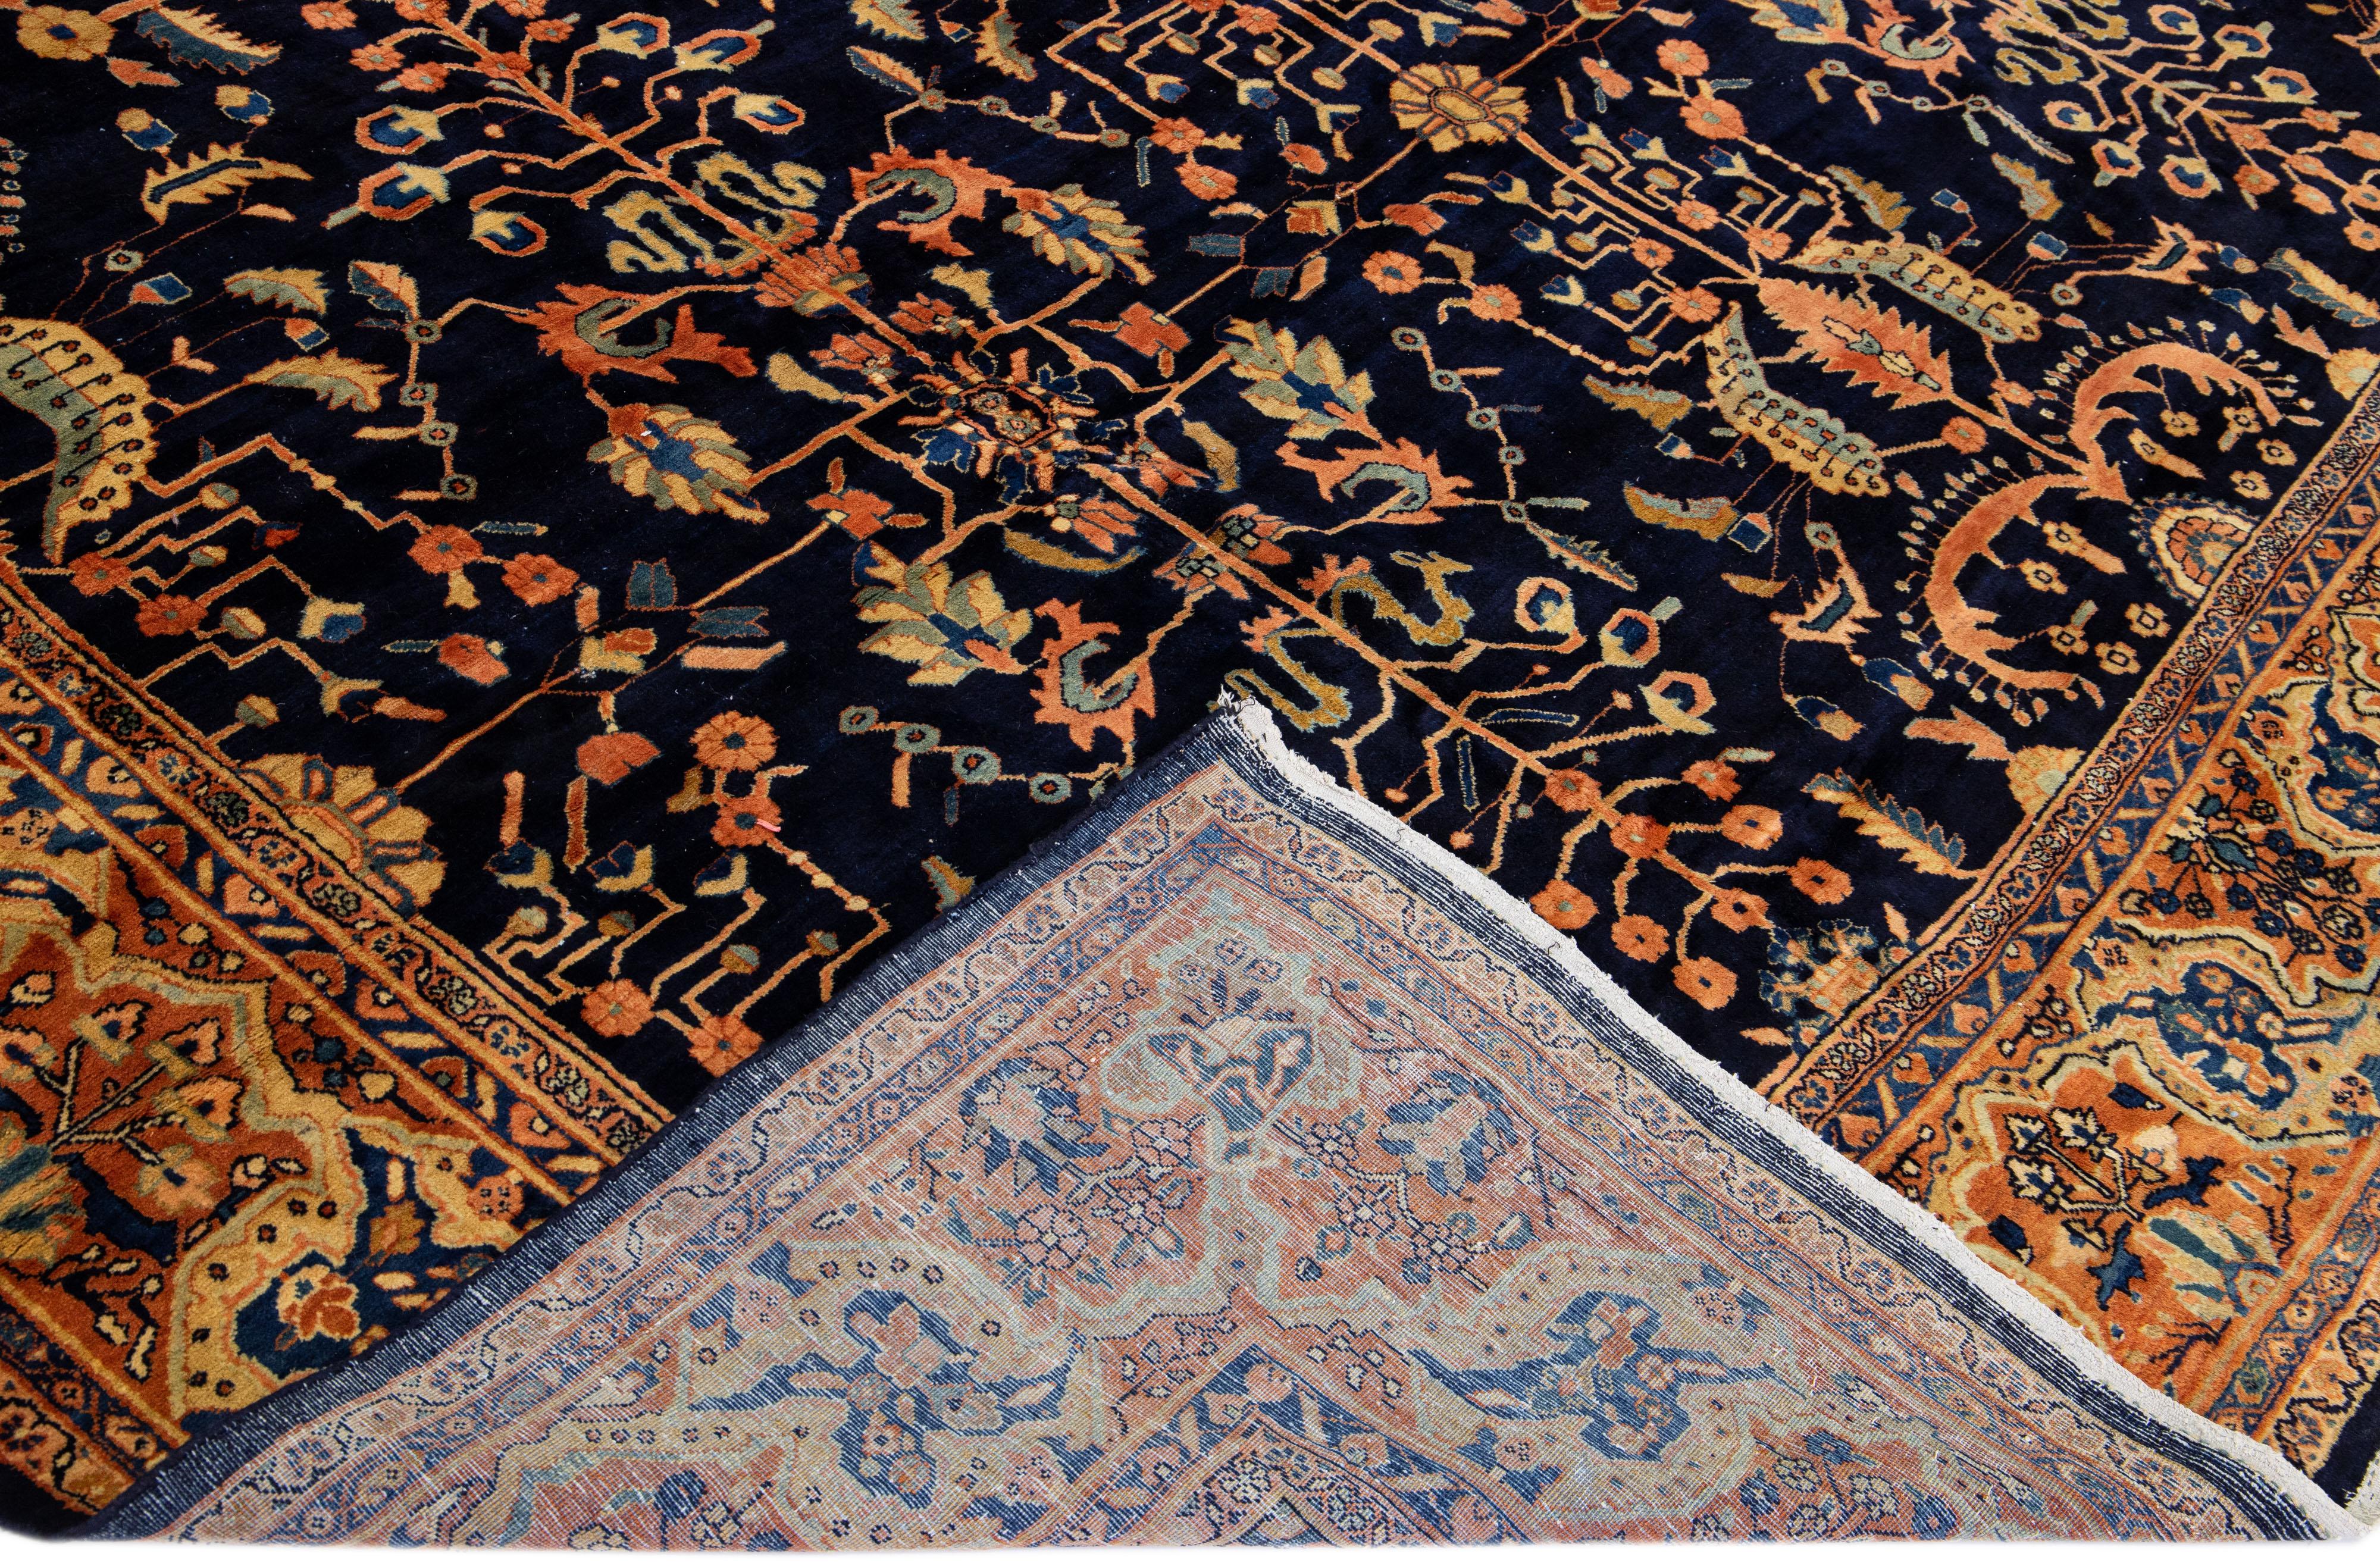 Beautiful Antique Farahan hand-knotted wool rug with a dark blue field. This Persian rug has a rusted-designed frame with multi-color accents on a Classic floral design.

This rug measure: 11'2